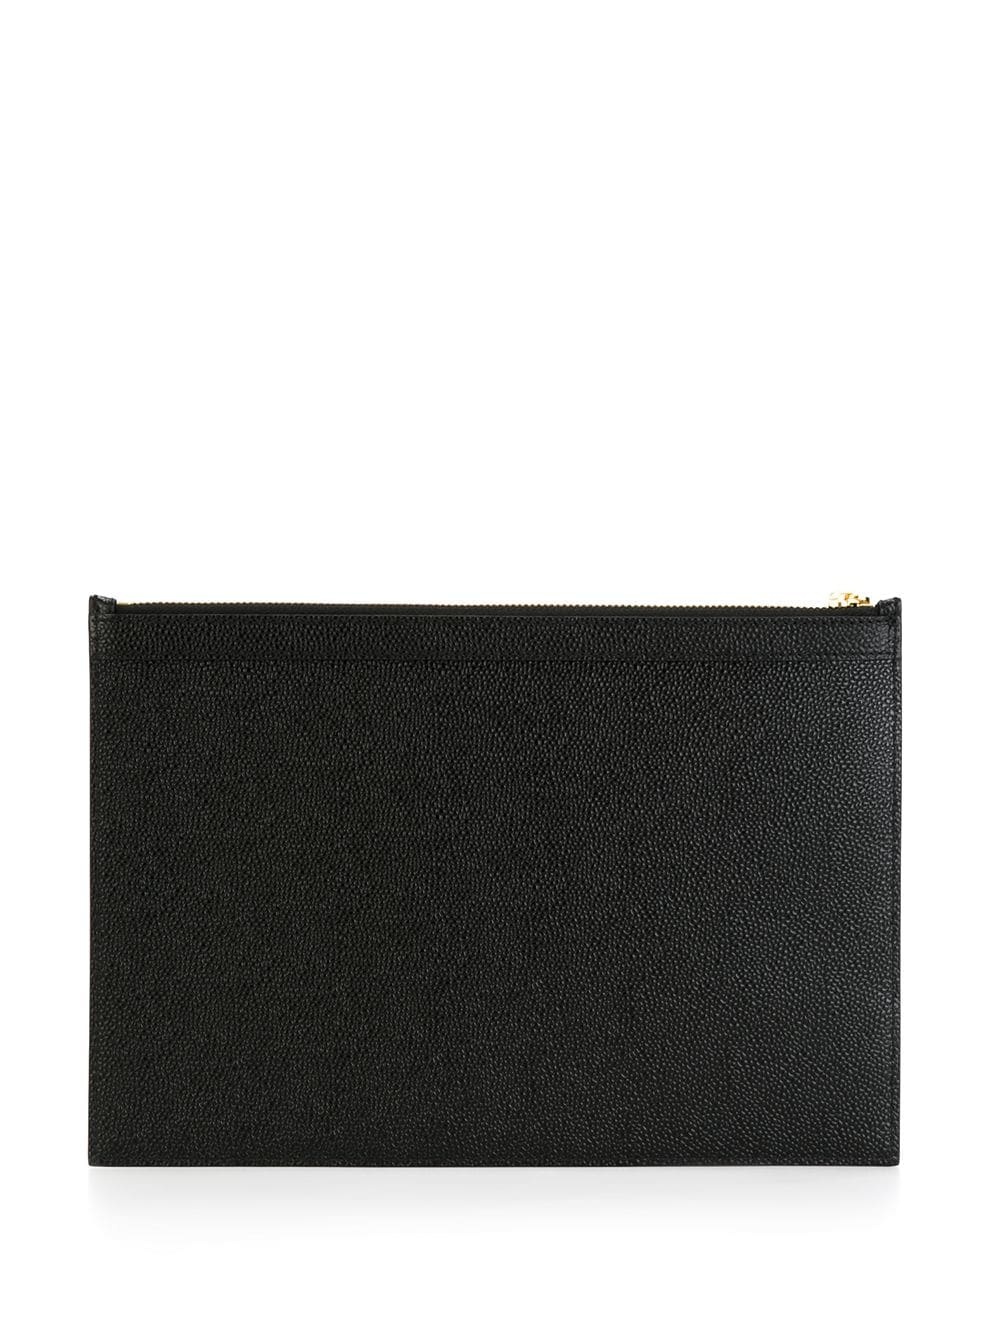 small tablet clutch - 3